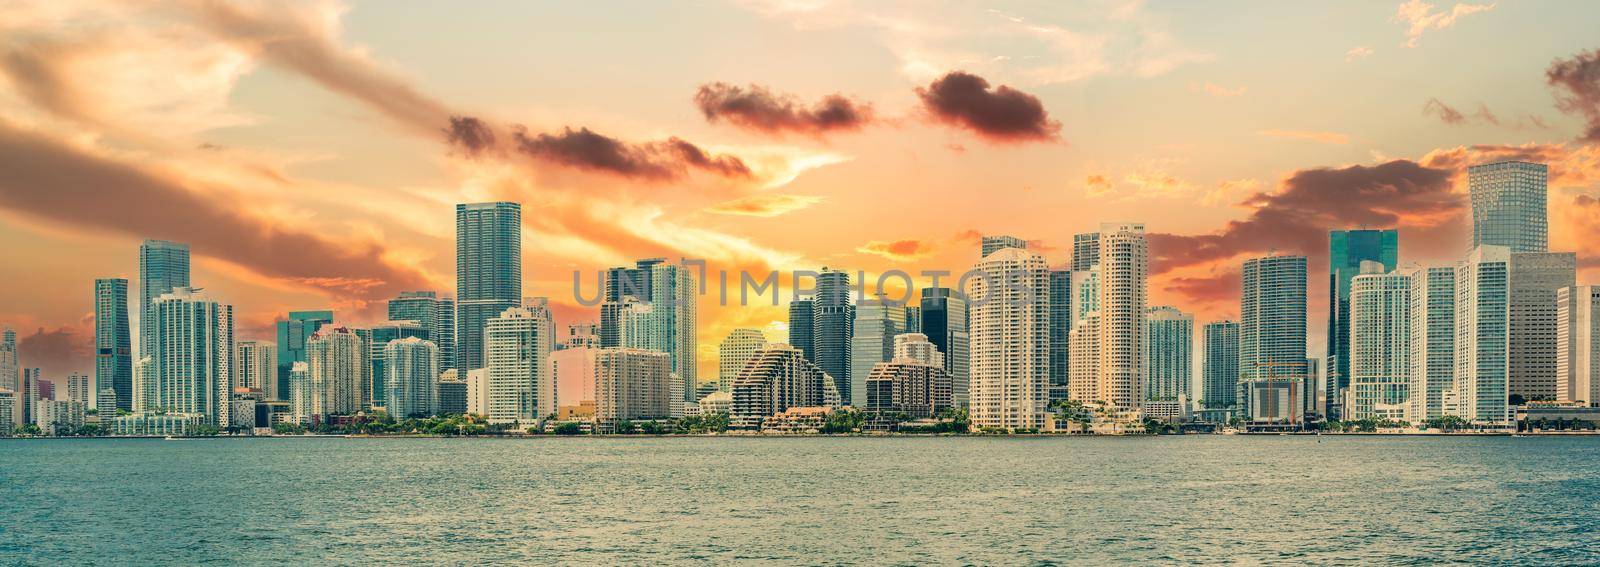 Miami Downtown skyline at sunset with Biscayne Bay by Mariakray